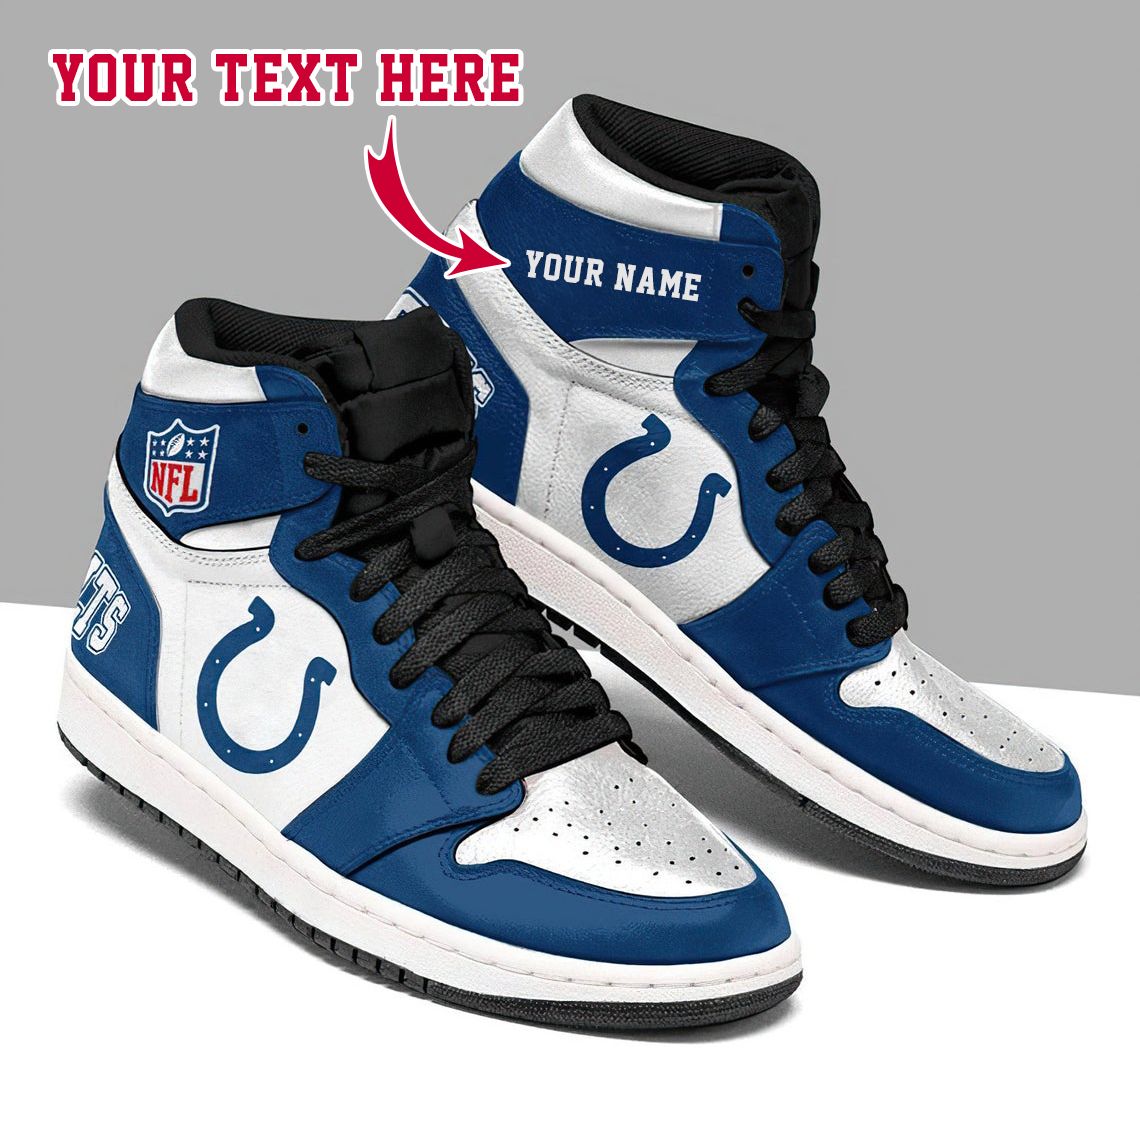 Indianapolis Colts B NFL Football High Retro Air Force Jordan 1 Customized Shoes